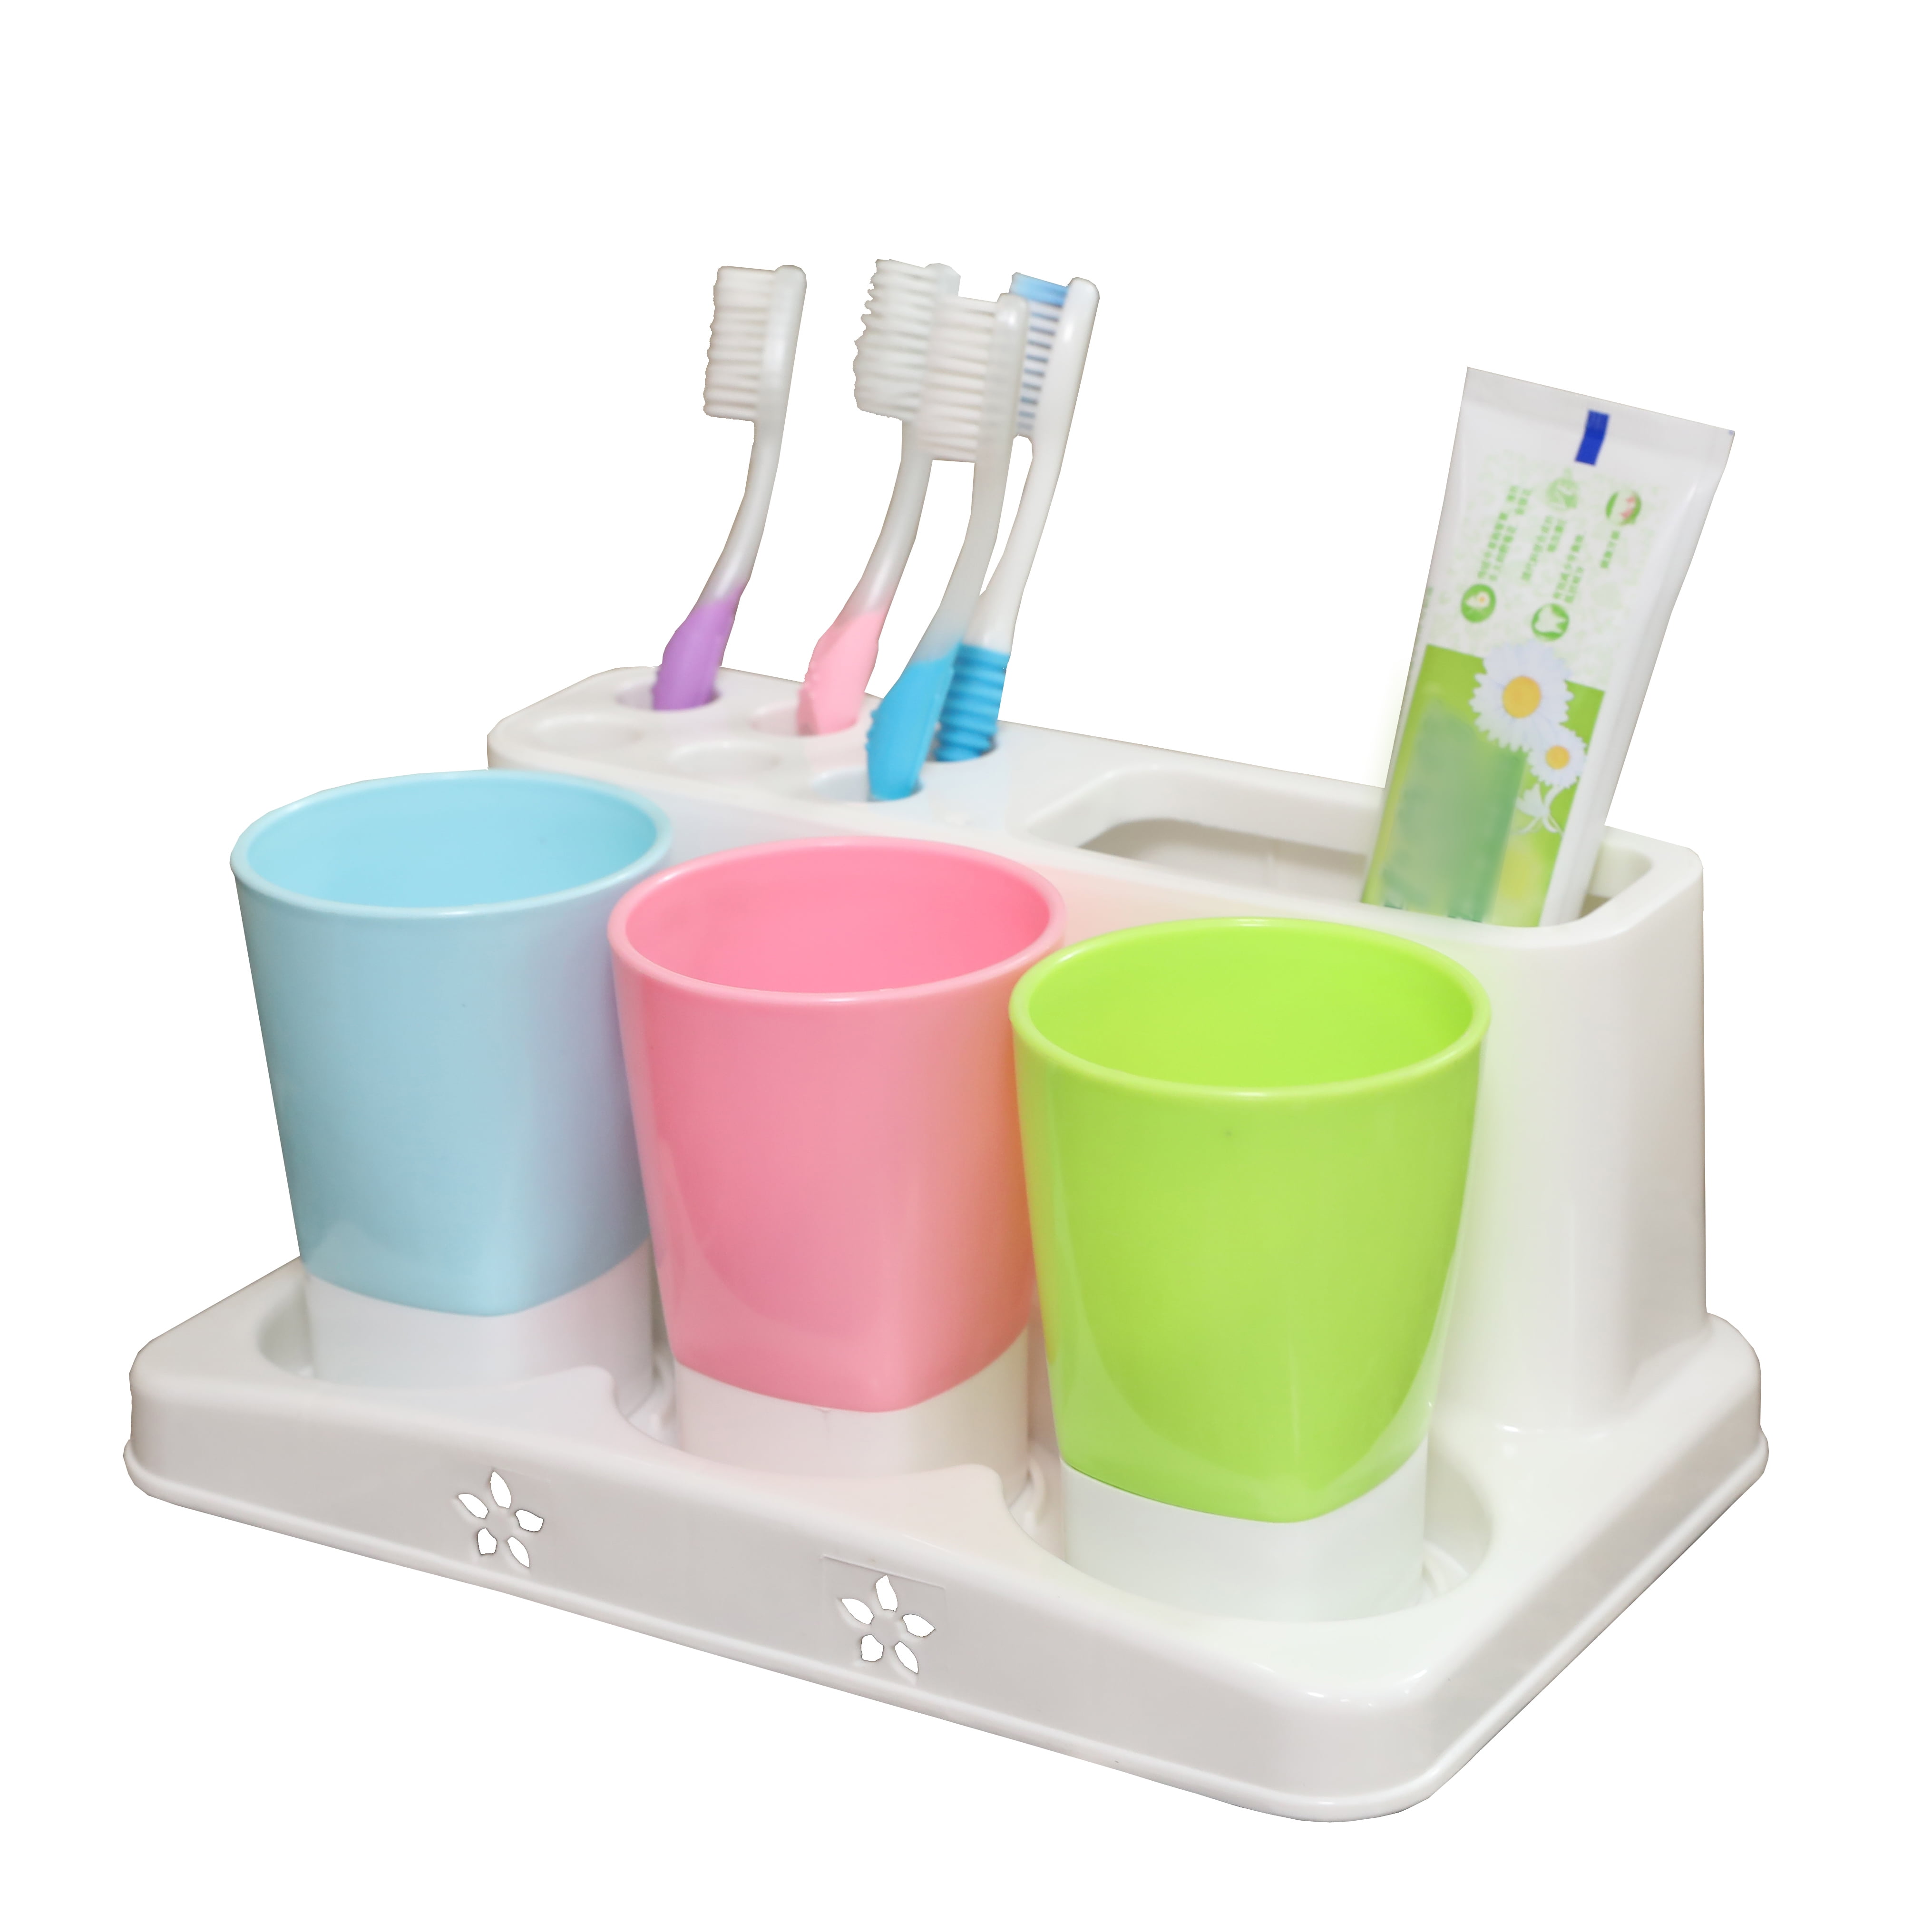 Plastic Bathroom Toothbrush Holder and Toothpaste Storage Organizer for Kids & Family Blue Multi-Functional 3 Slots Toothbrush Caddy for Vanity Countertop